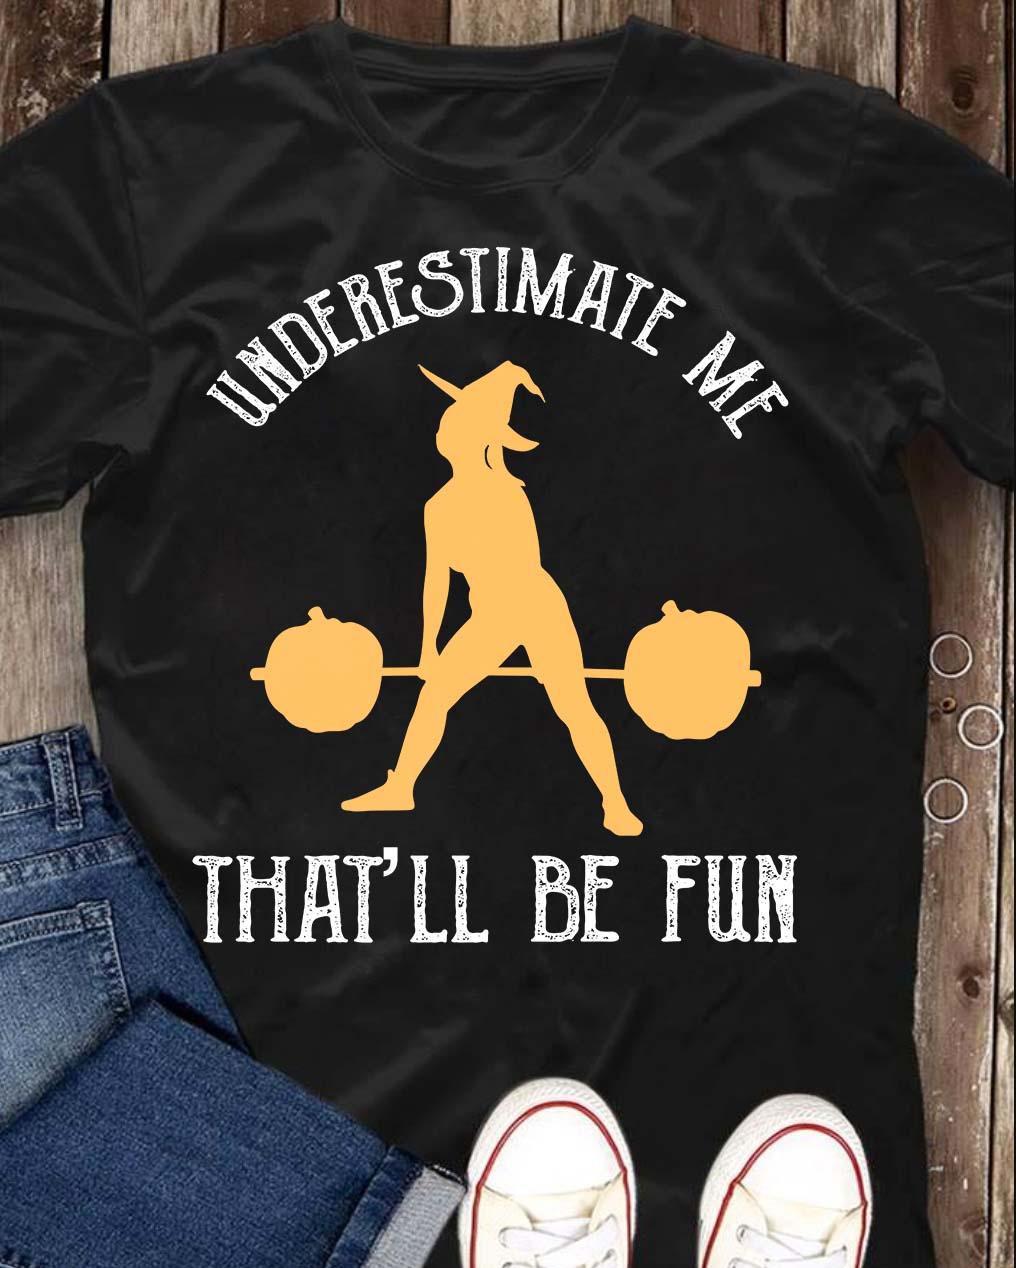 Underestimate me that'll be fun - Halloween witch lifting weights, weight lifting T-shirt